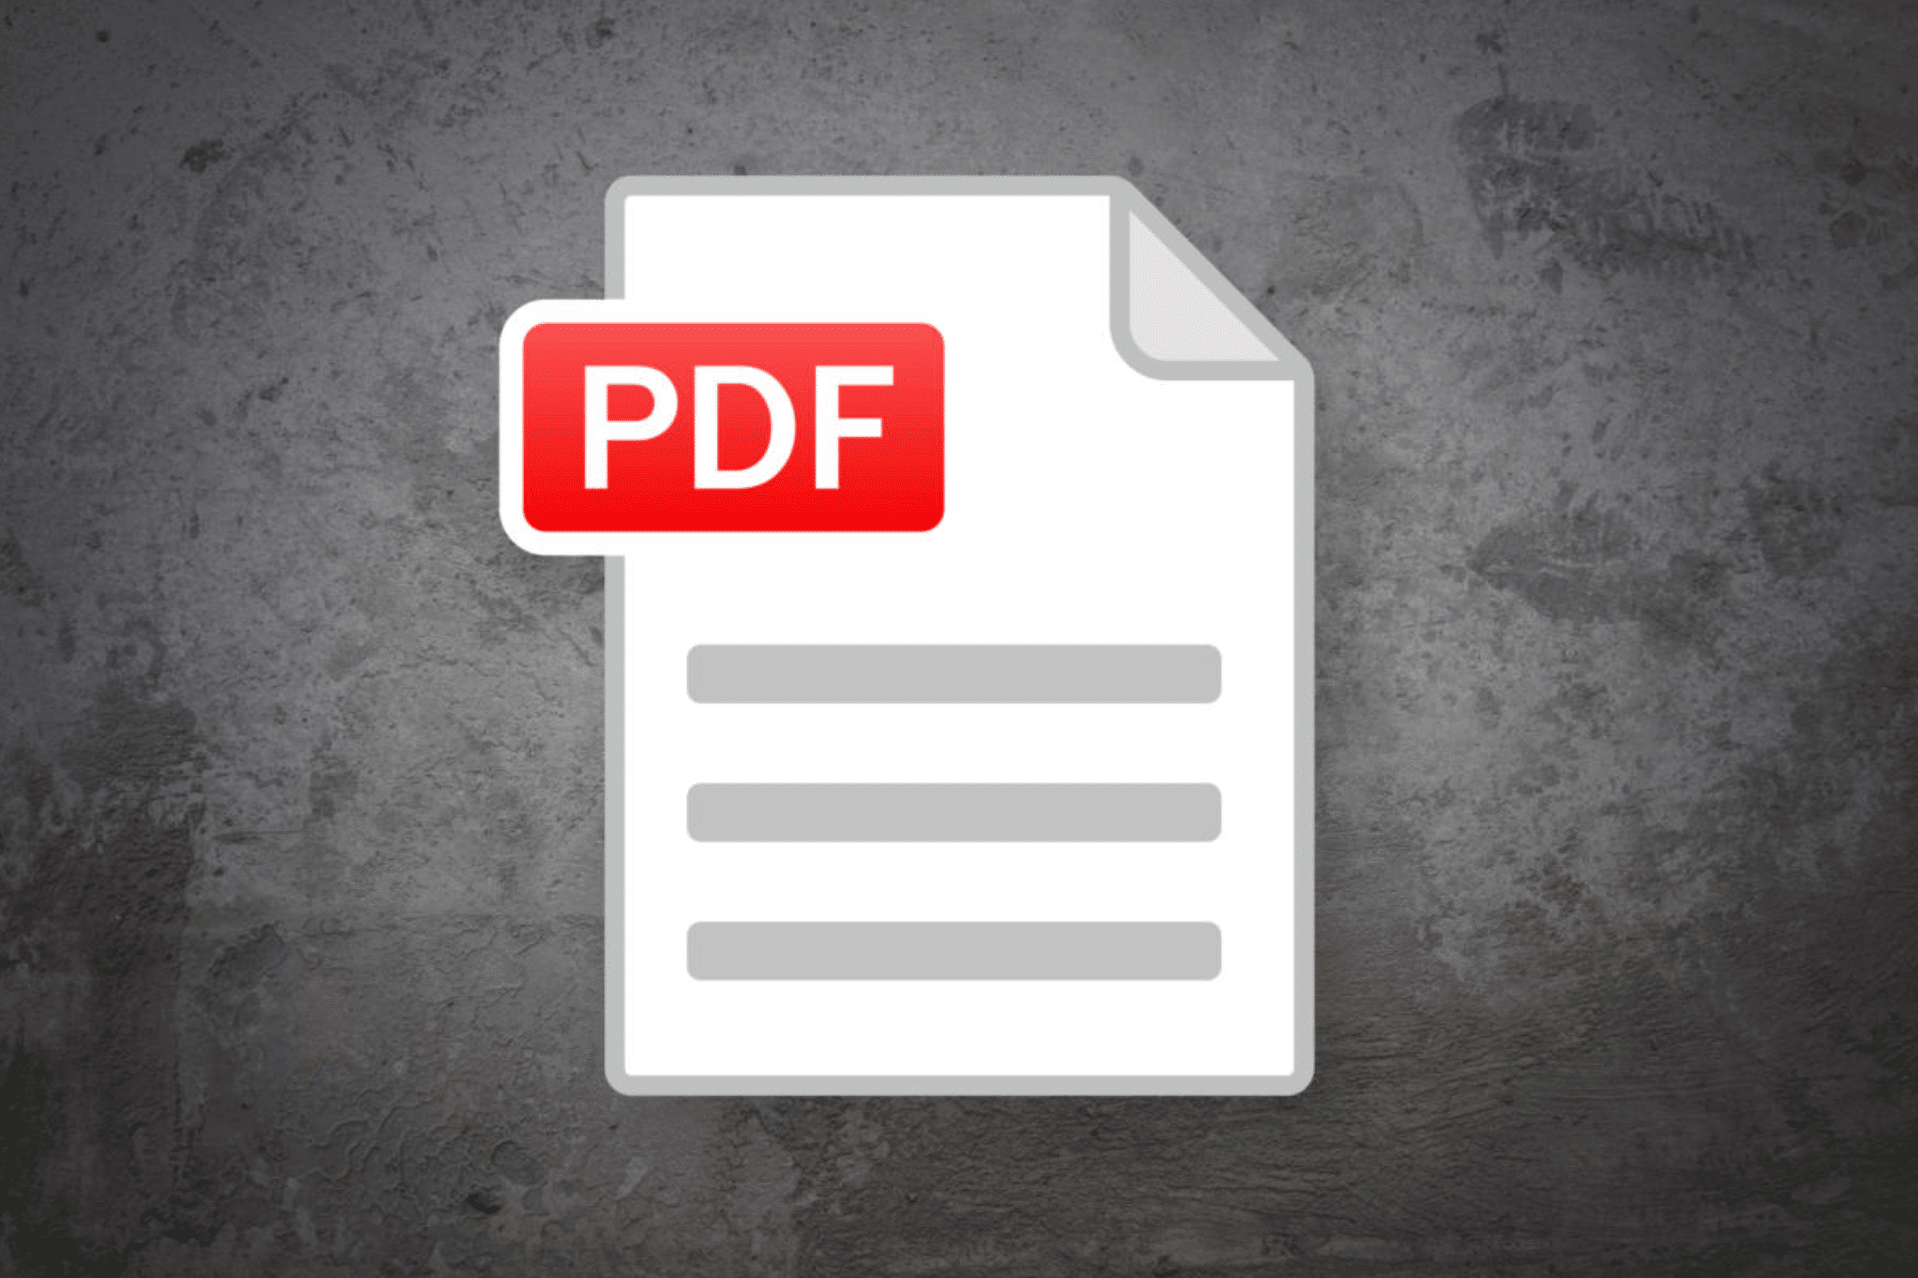 save blog posts and website articles as PDF files